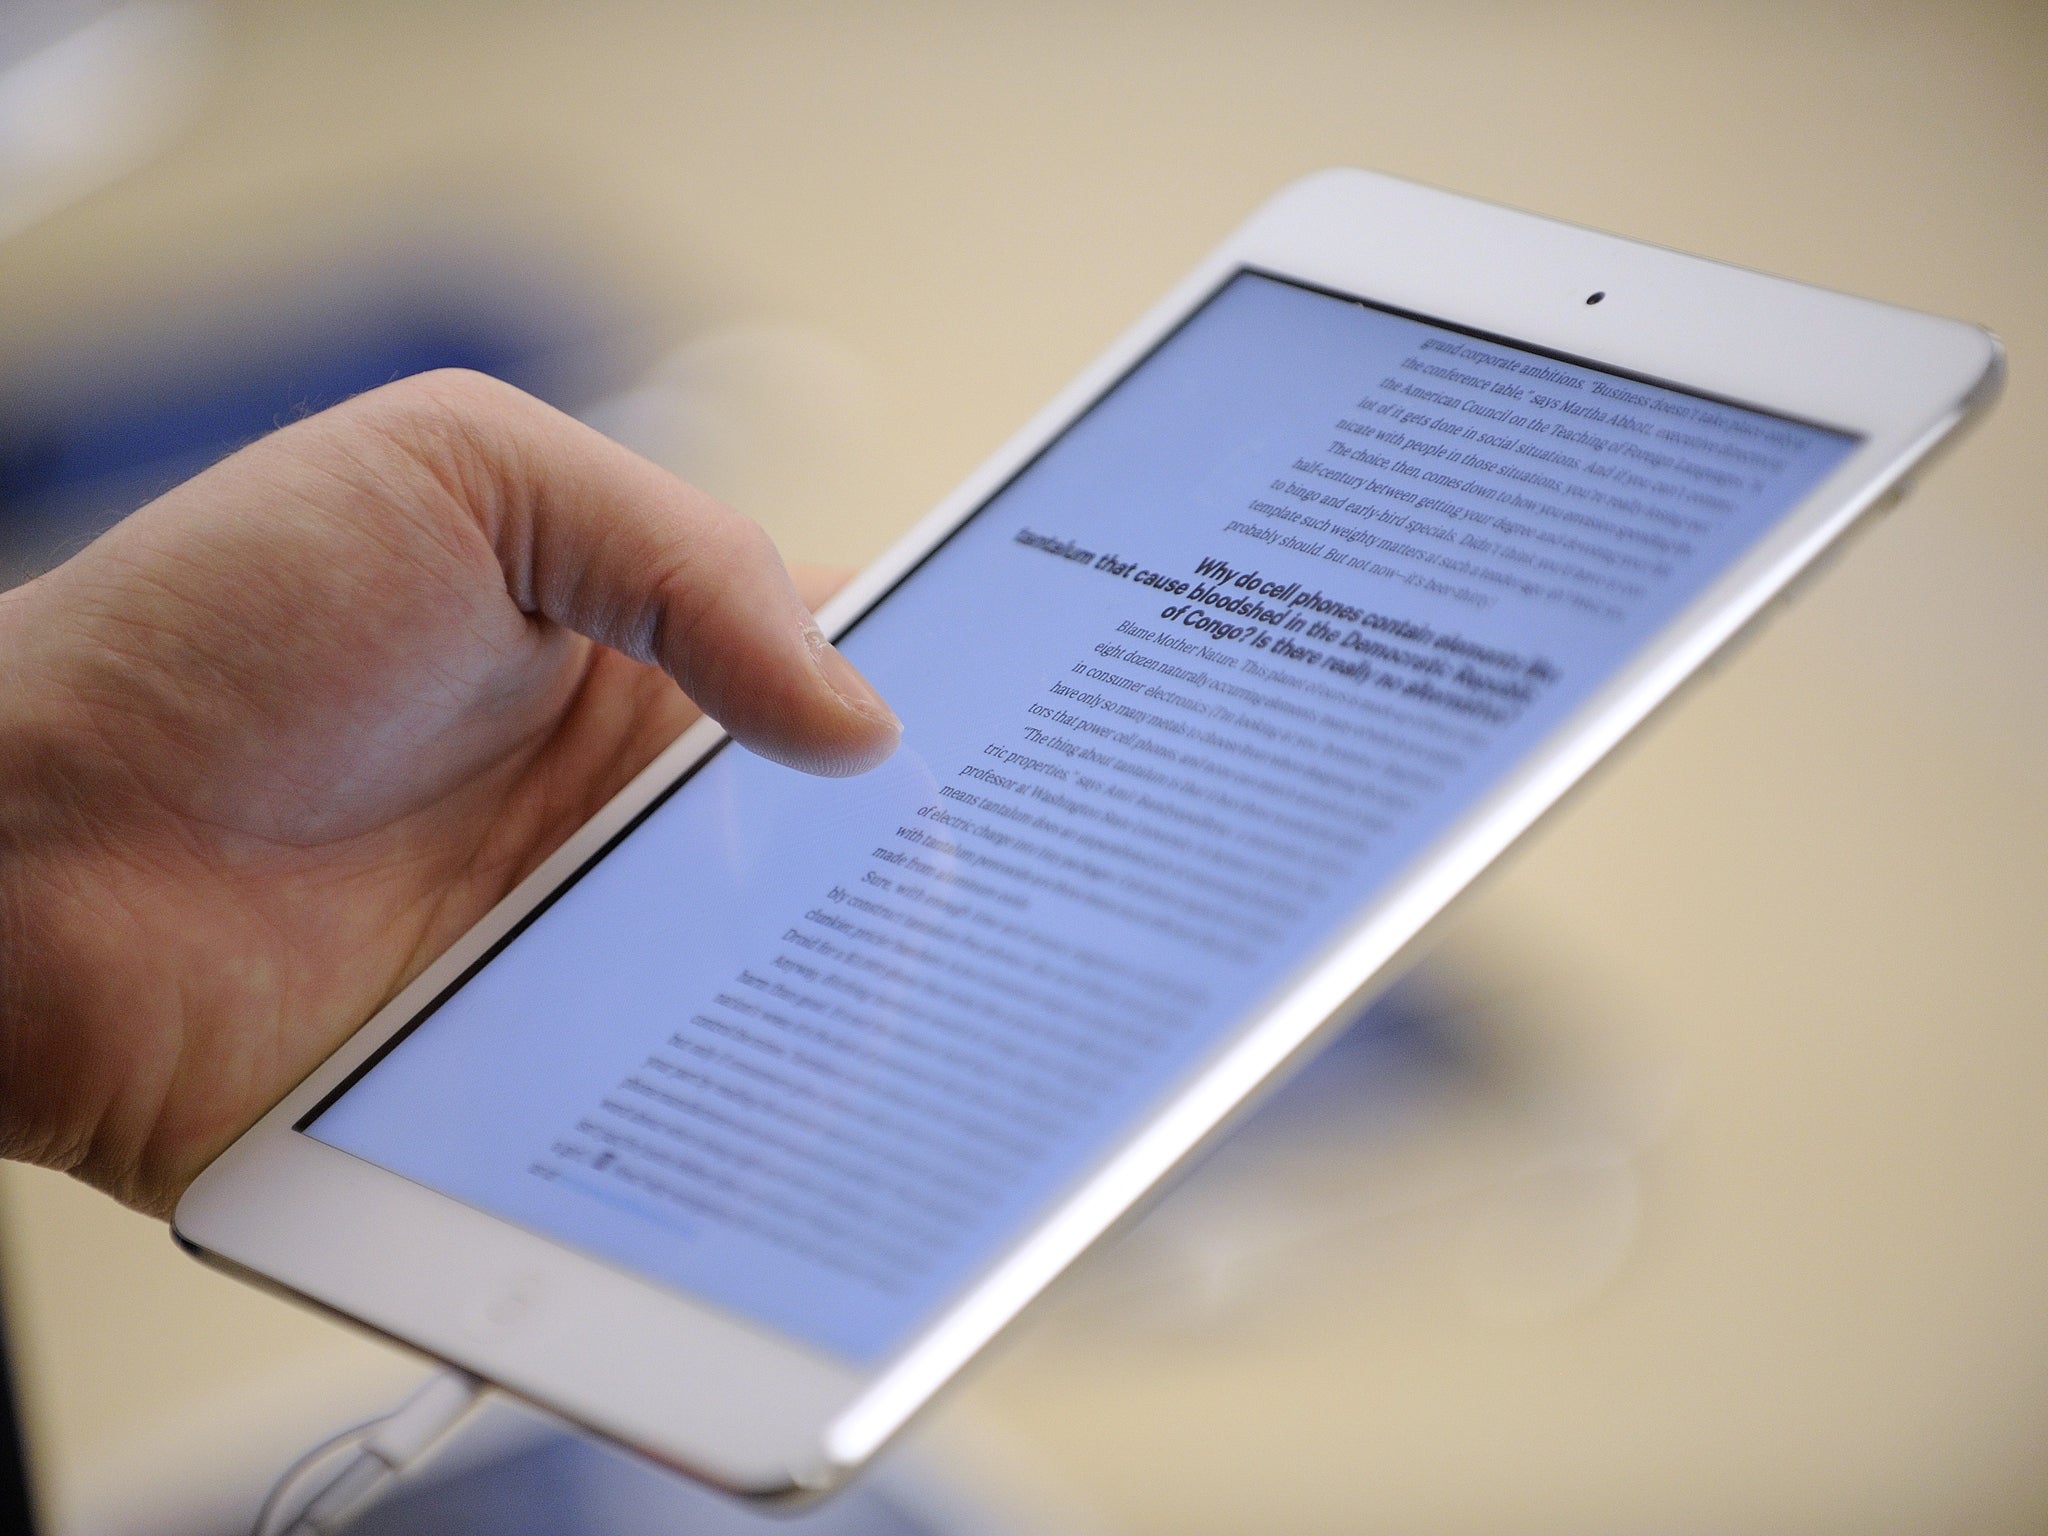 The iPad Mini was released at the beginning of November